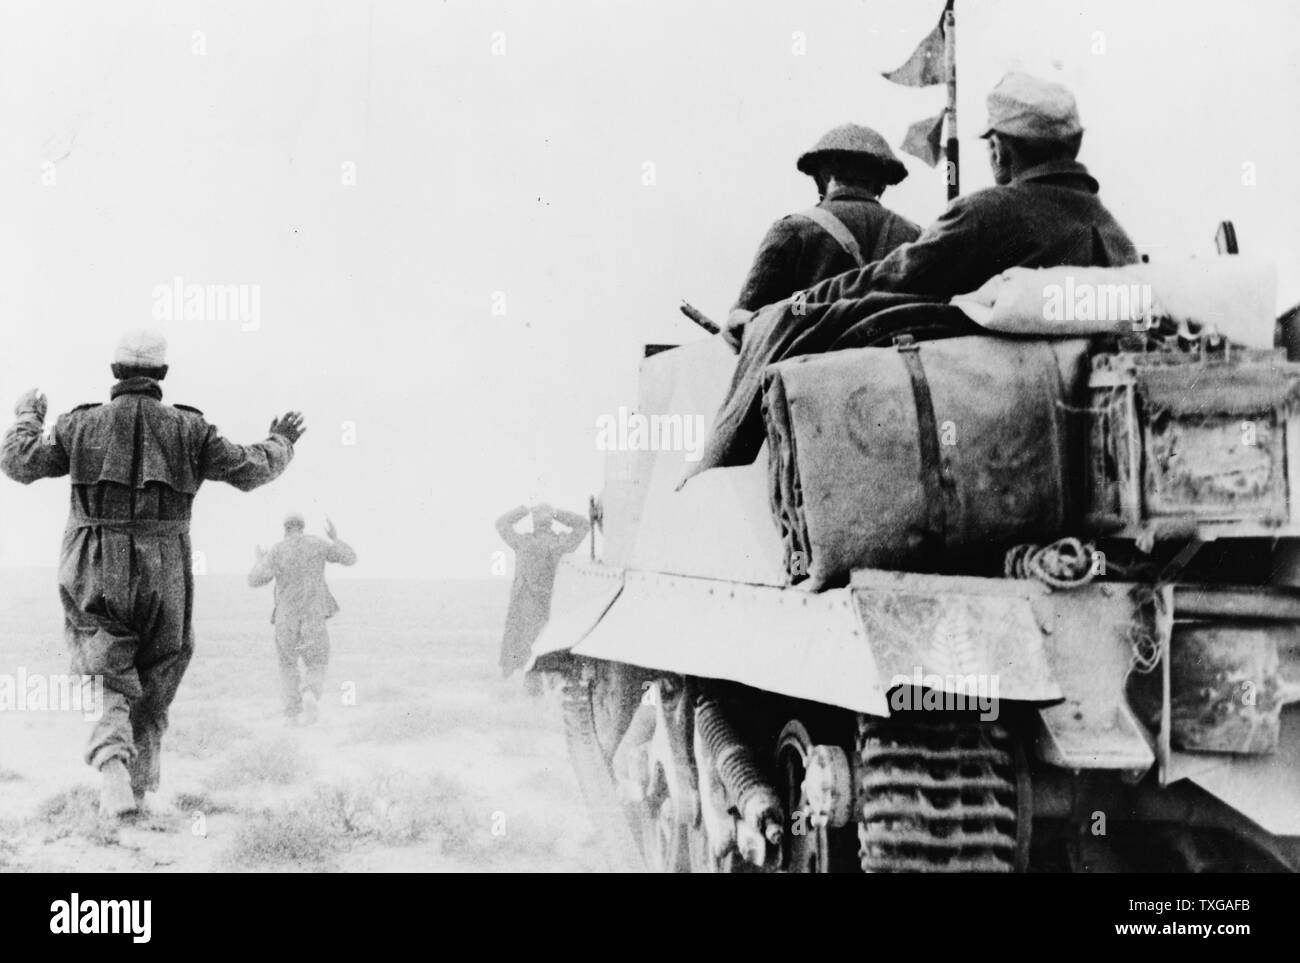 German infantry surrendering to men of New Zealand Bren carrier unit. A wounded prisoner can be seen riding in the back of the carrier, Jan, 1942 Stock Photo